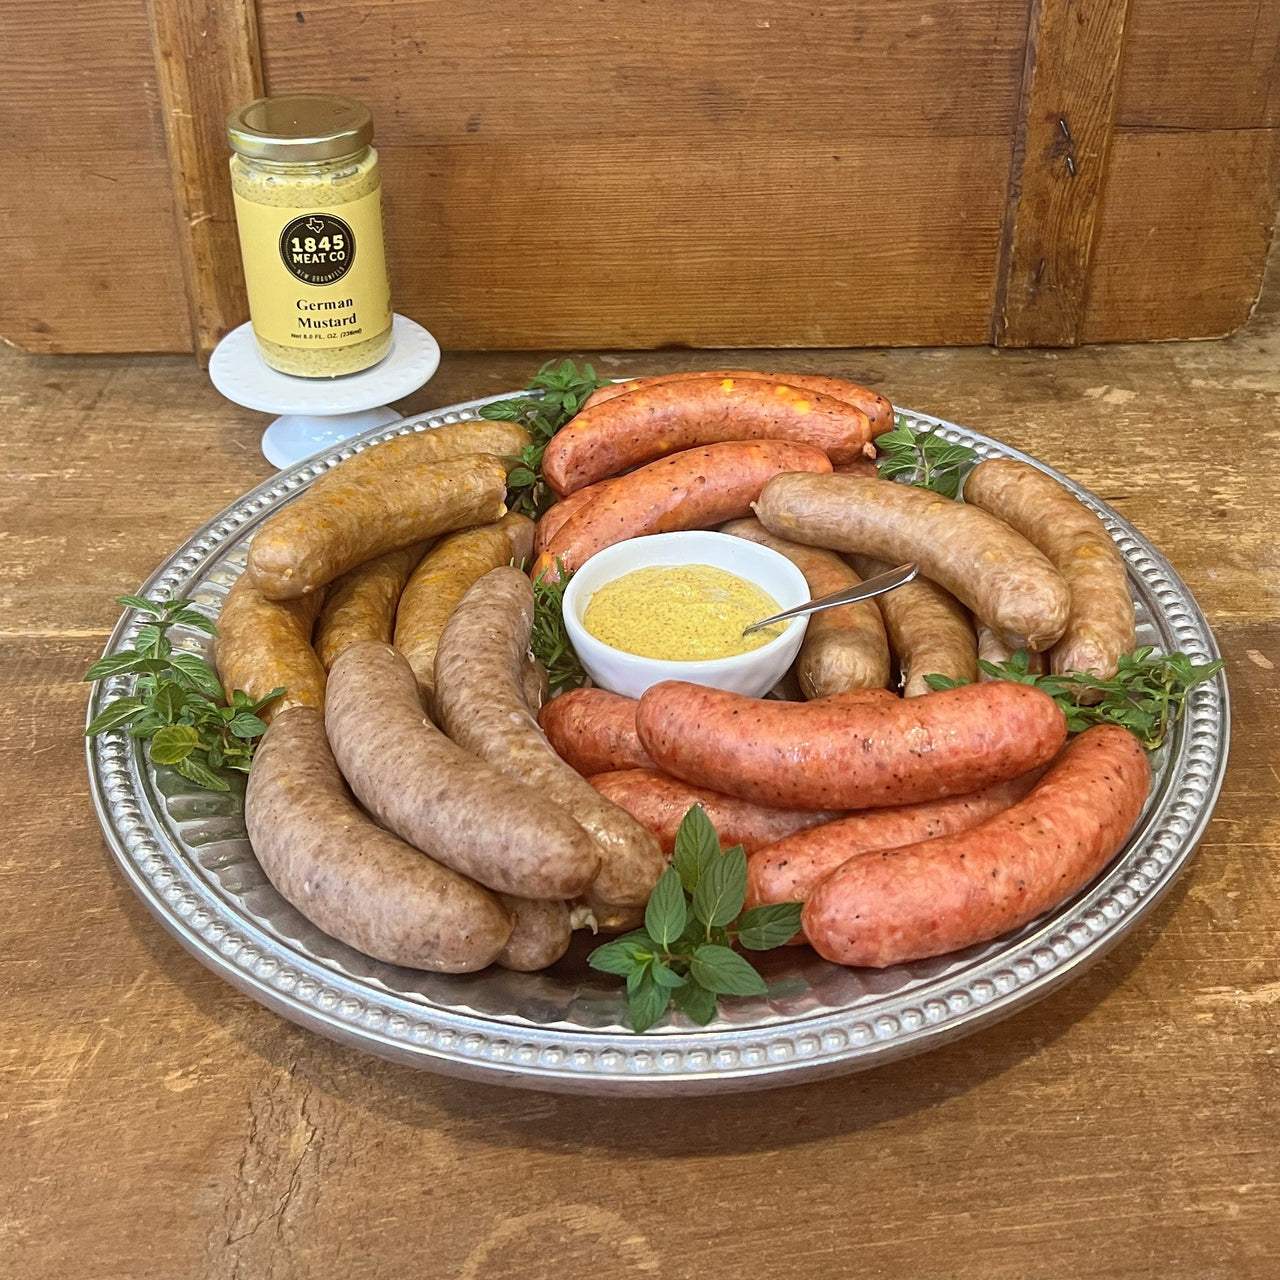 This great collection of some of our best sausage is a family favorite.  Includes:  16 oz. Pork & Beef Sausage 16 oz. Bratwurst 16 oz. Cheddar Sausage 16 oz. Peach Jalapeno Sausage 16 oz. Spiced Apple Sausage 8 oz. Jar of German Mustard ﻿Item #50E